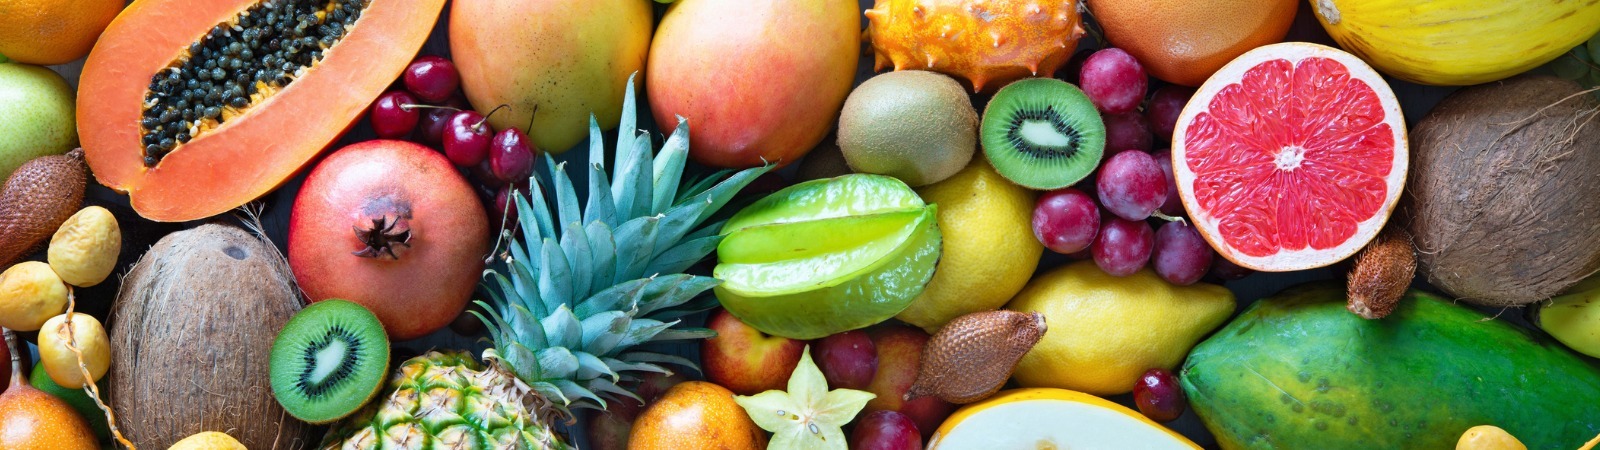 Assortment of colorful, tropical fruits